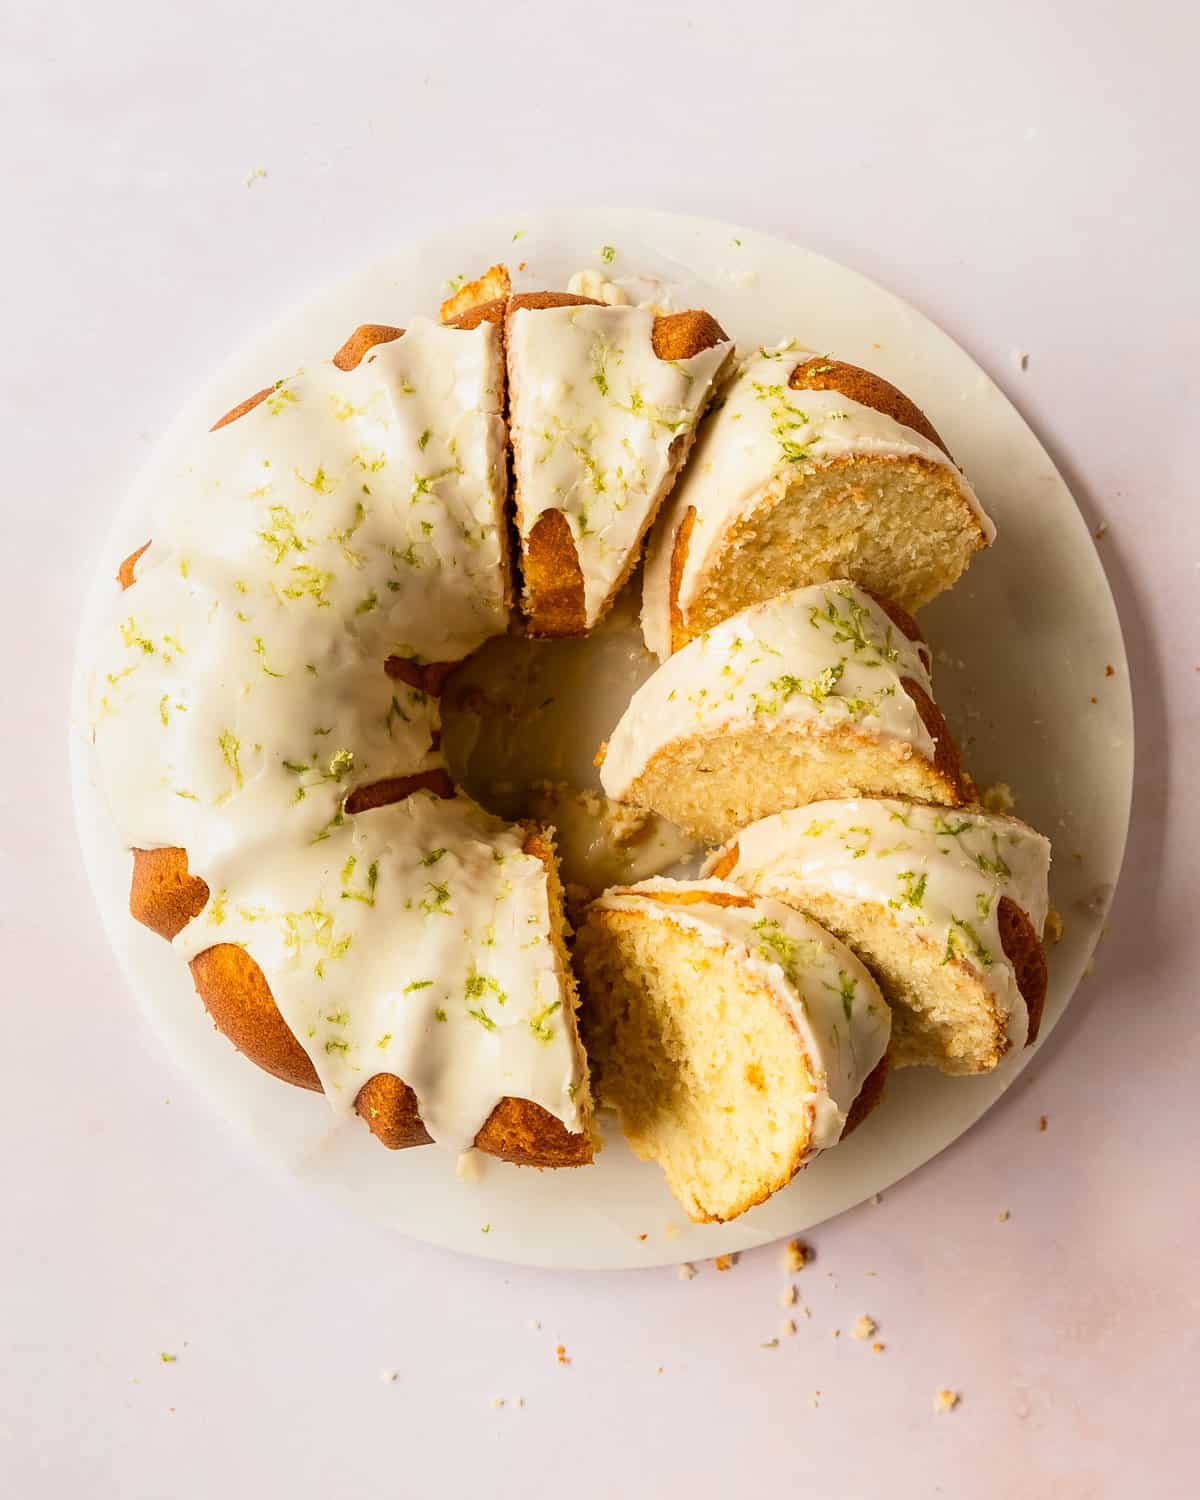 This key lime pound cake is a decadent, rich and buttery pound cake filled with key lime flavor. Top with this lime pound cake with a deliciously tart and sweet key lime glaze. Enjoy this easy to make, tropical twist on the classic southern pound cake for breakfast, brunch or dessert. 